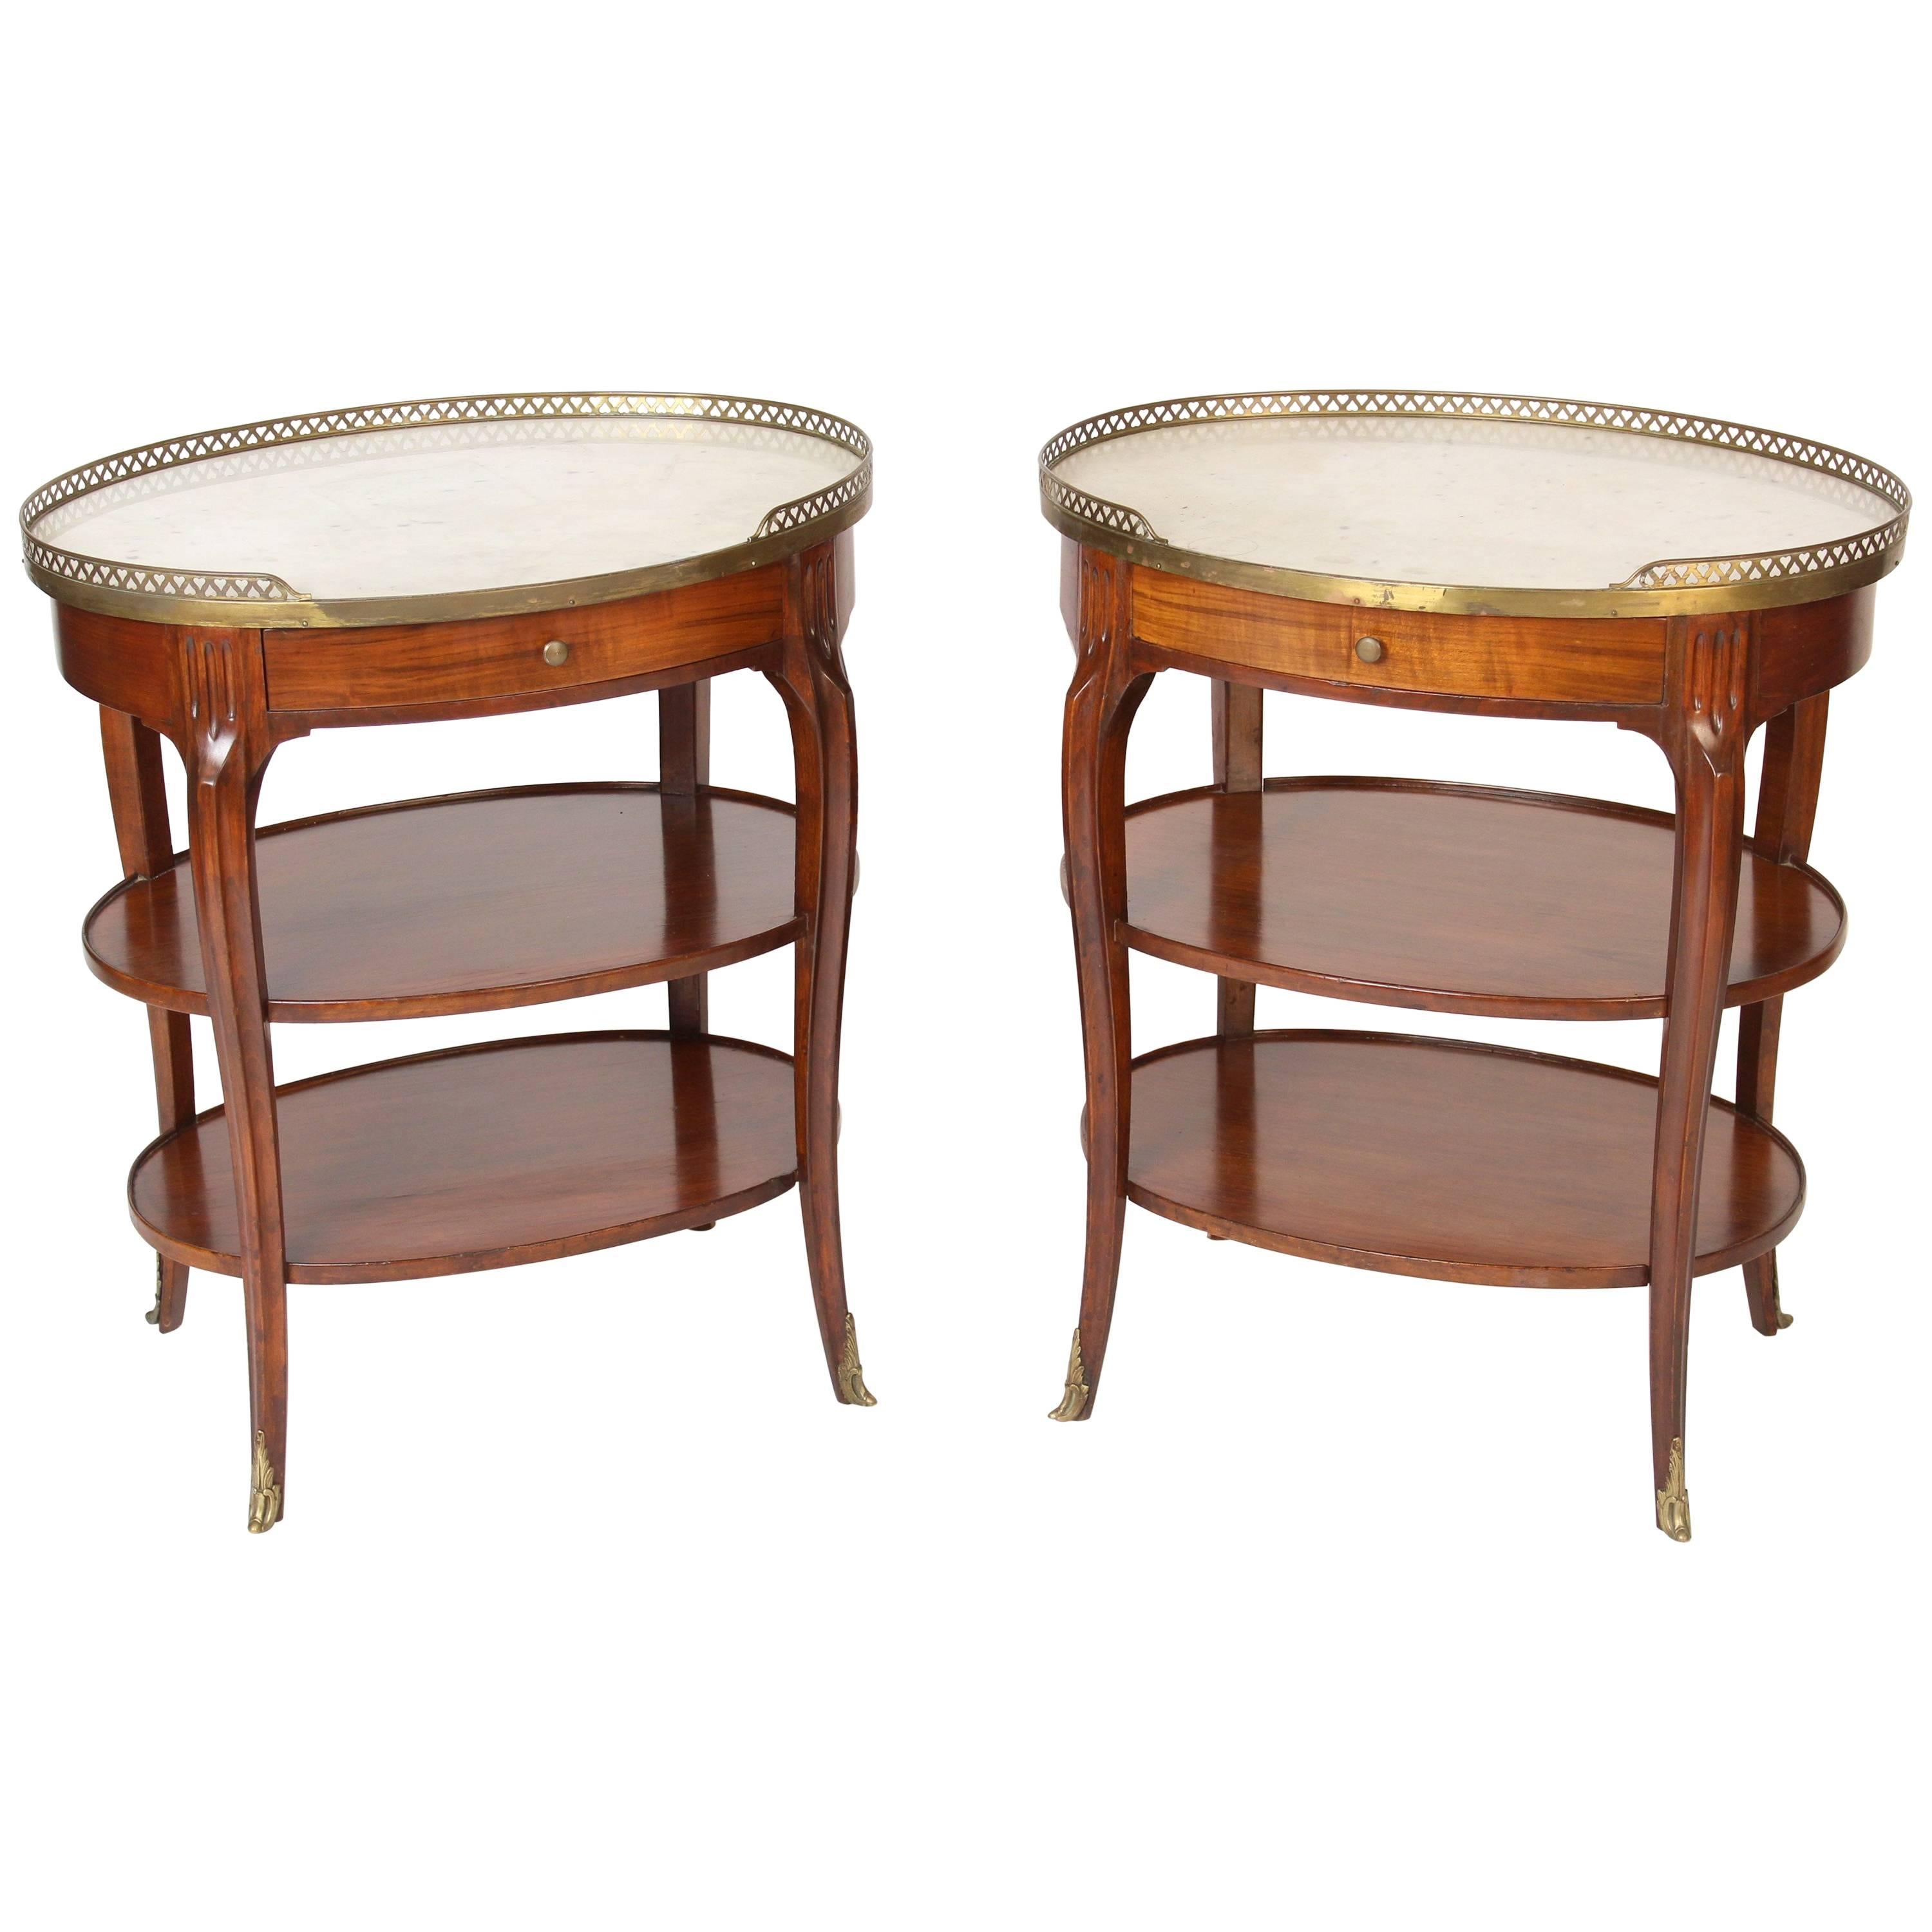 Pair of Louis XV Style Marble-Top Occasional Tables